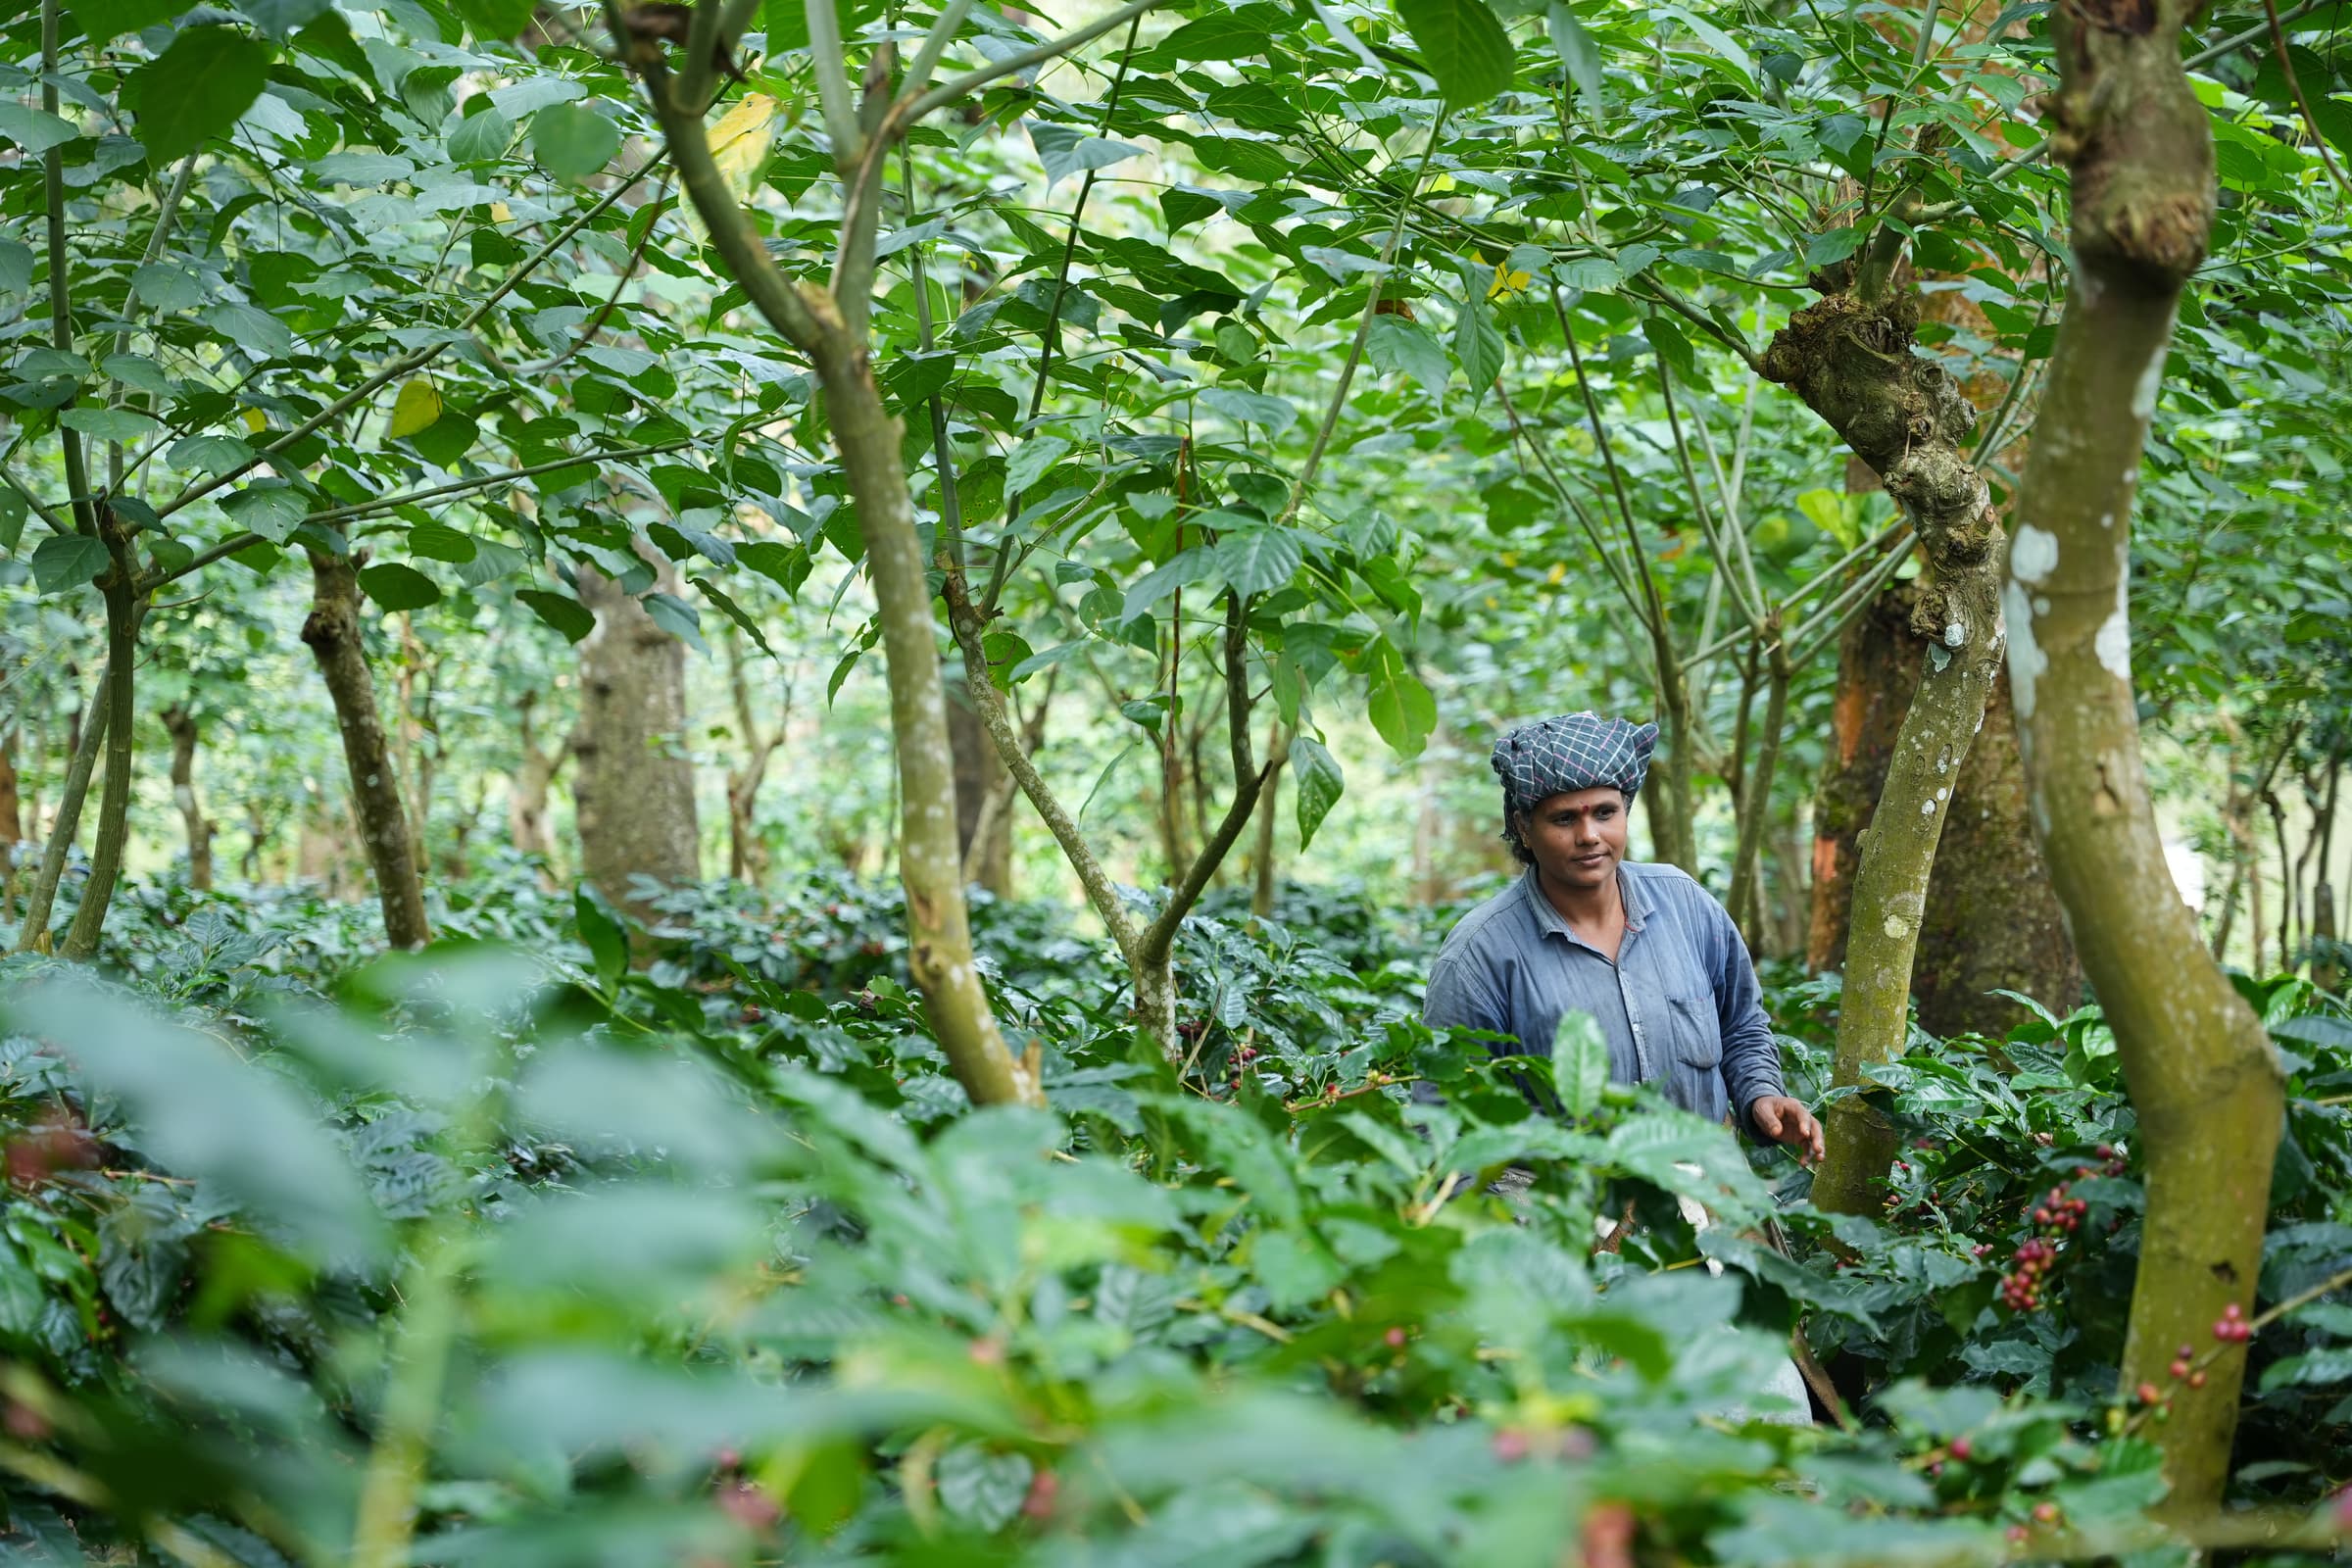 A farm laborer walks amongst the fields at the CCRI trial site, where complex, multi-crop agroforestry sytems have been installed to prevent susceptibility to white stem borer, a pest that invades tree bark in areas of sun exposure.